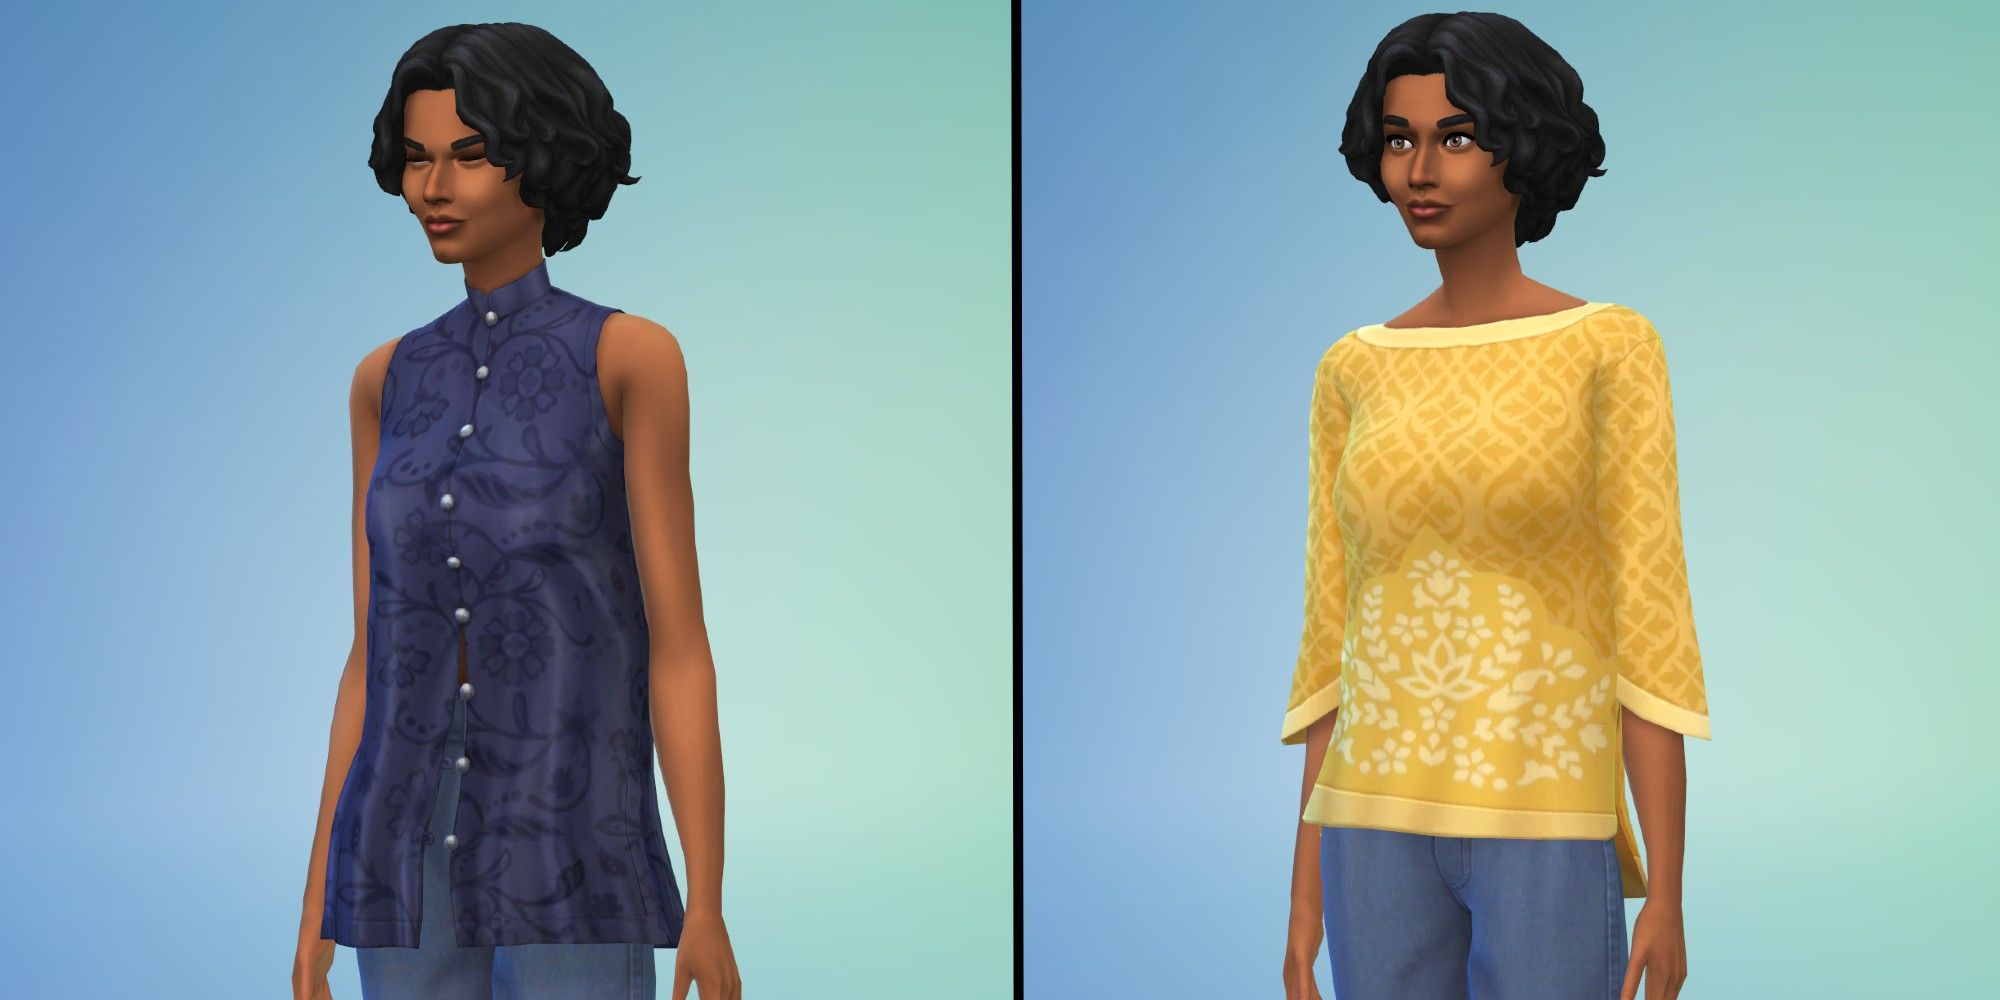 Sims 4: Fashion Steet Kit, Feminine Tops with default swatches, in the CAS Screen